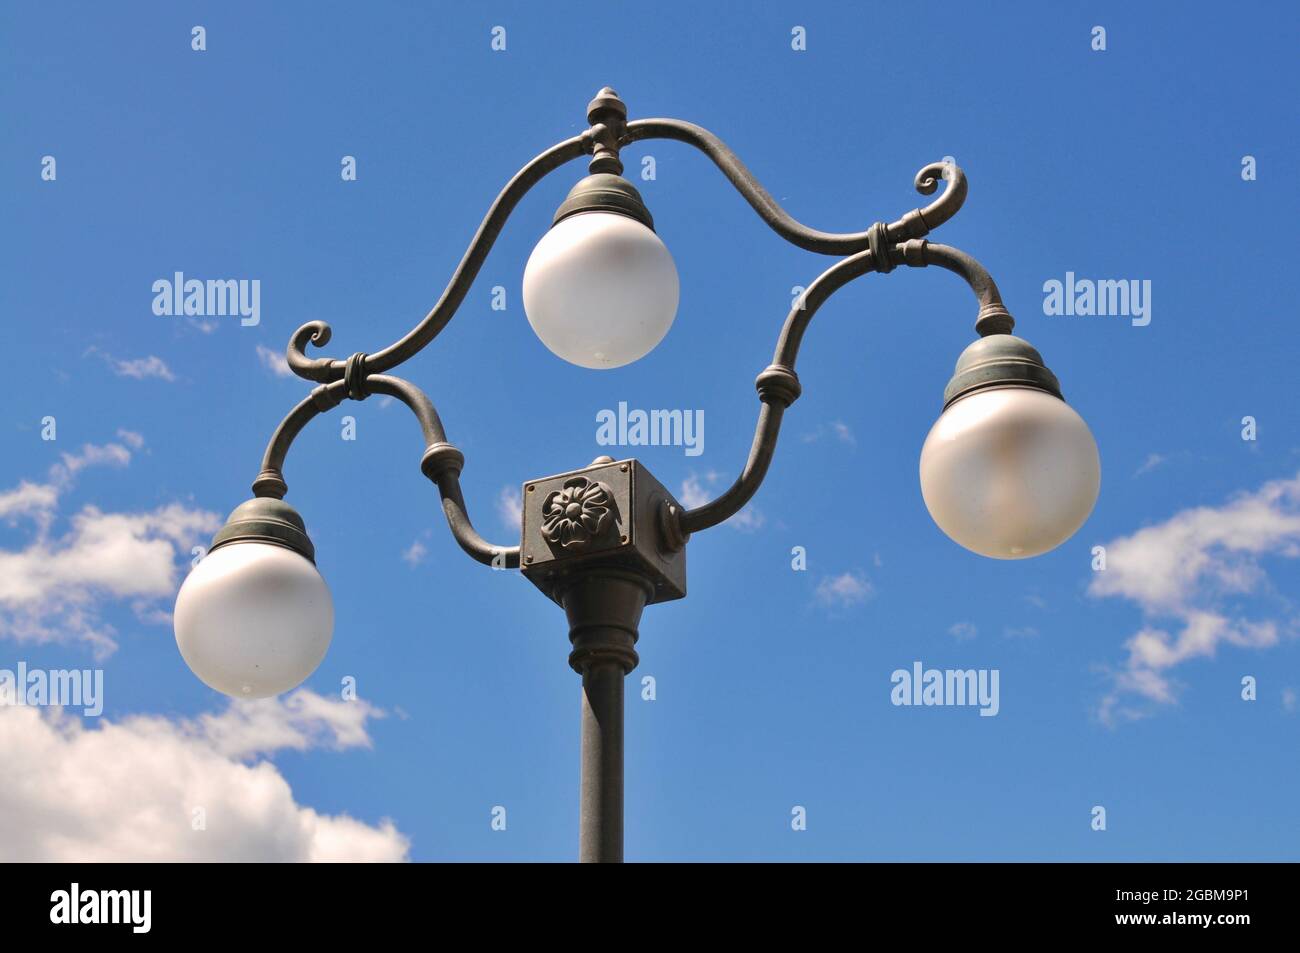 Close up of a beautiful vintage style street lamp of the city of Lugano in Switzerland against a blue sky Stock Photo